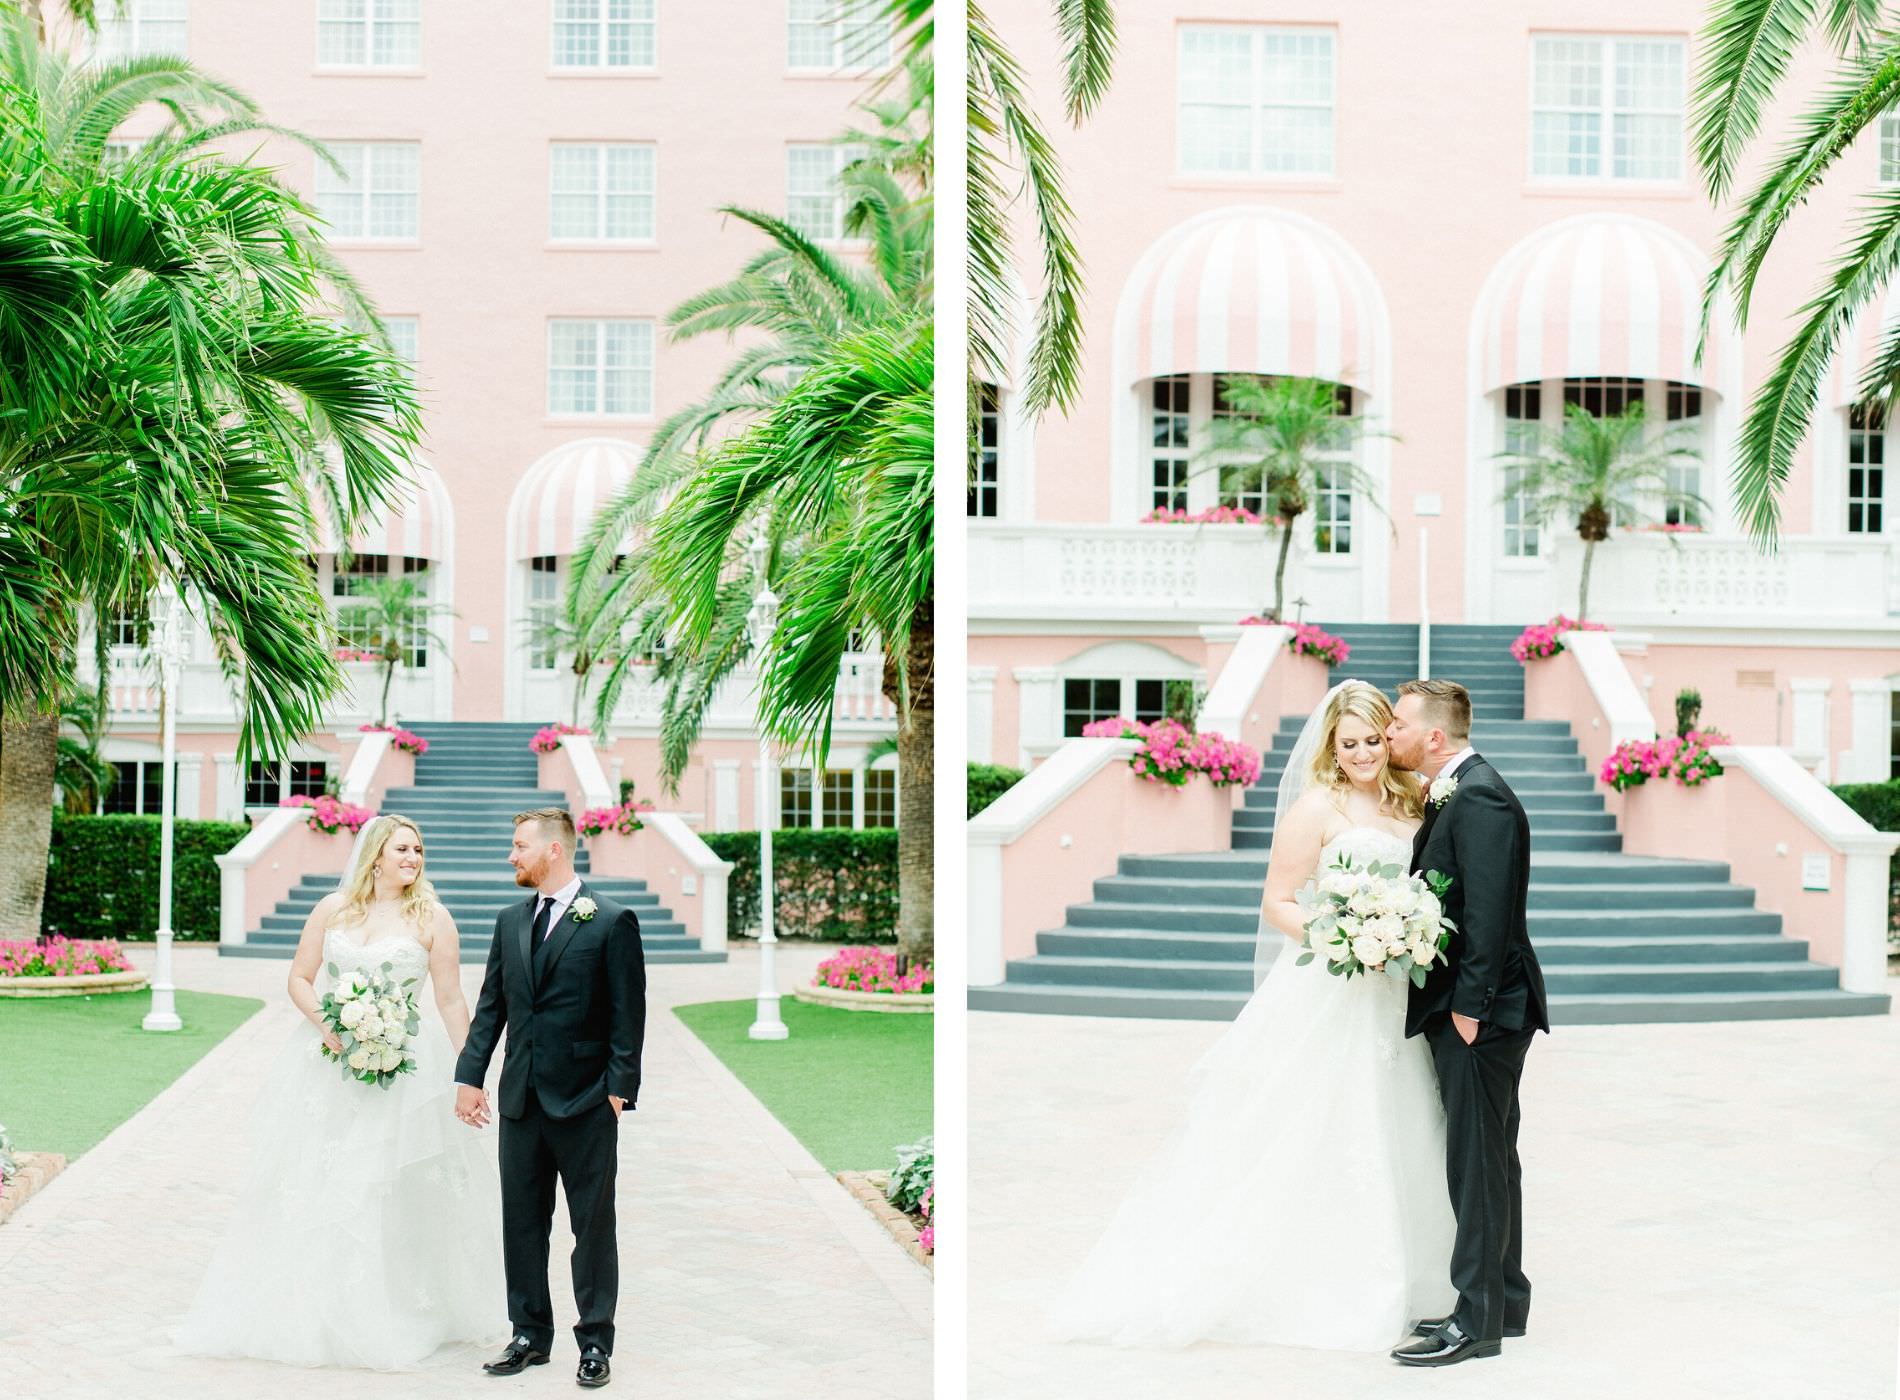 Staircase Wedding Ceremony | Bride and Groom Outdoor Hotel Courtyard Portraits | St Pete Beach Wedding Venue The Don Cesar | Classic Greenery White Flowers Bouquet | Groom Wearing Classic Black Suit Tux